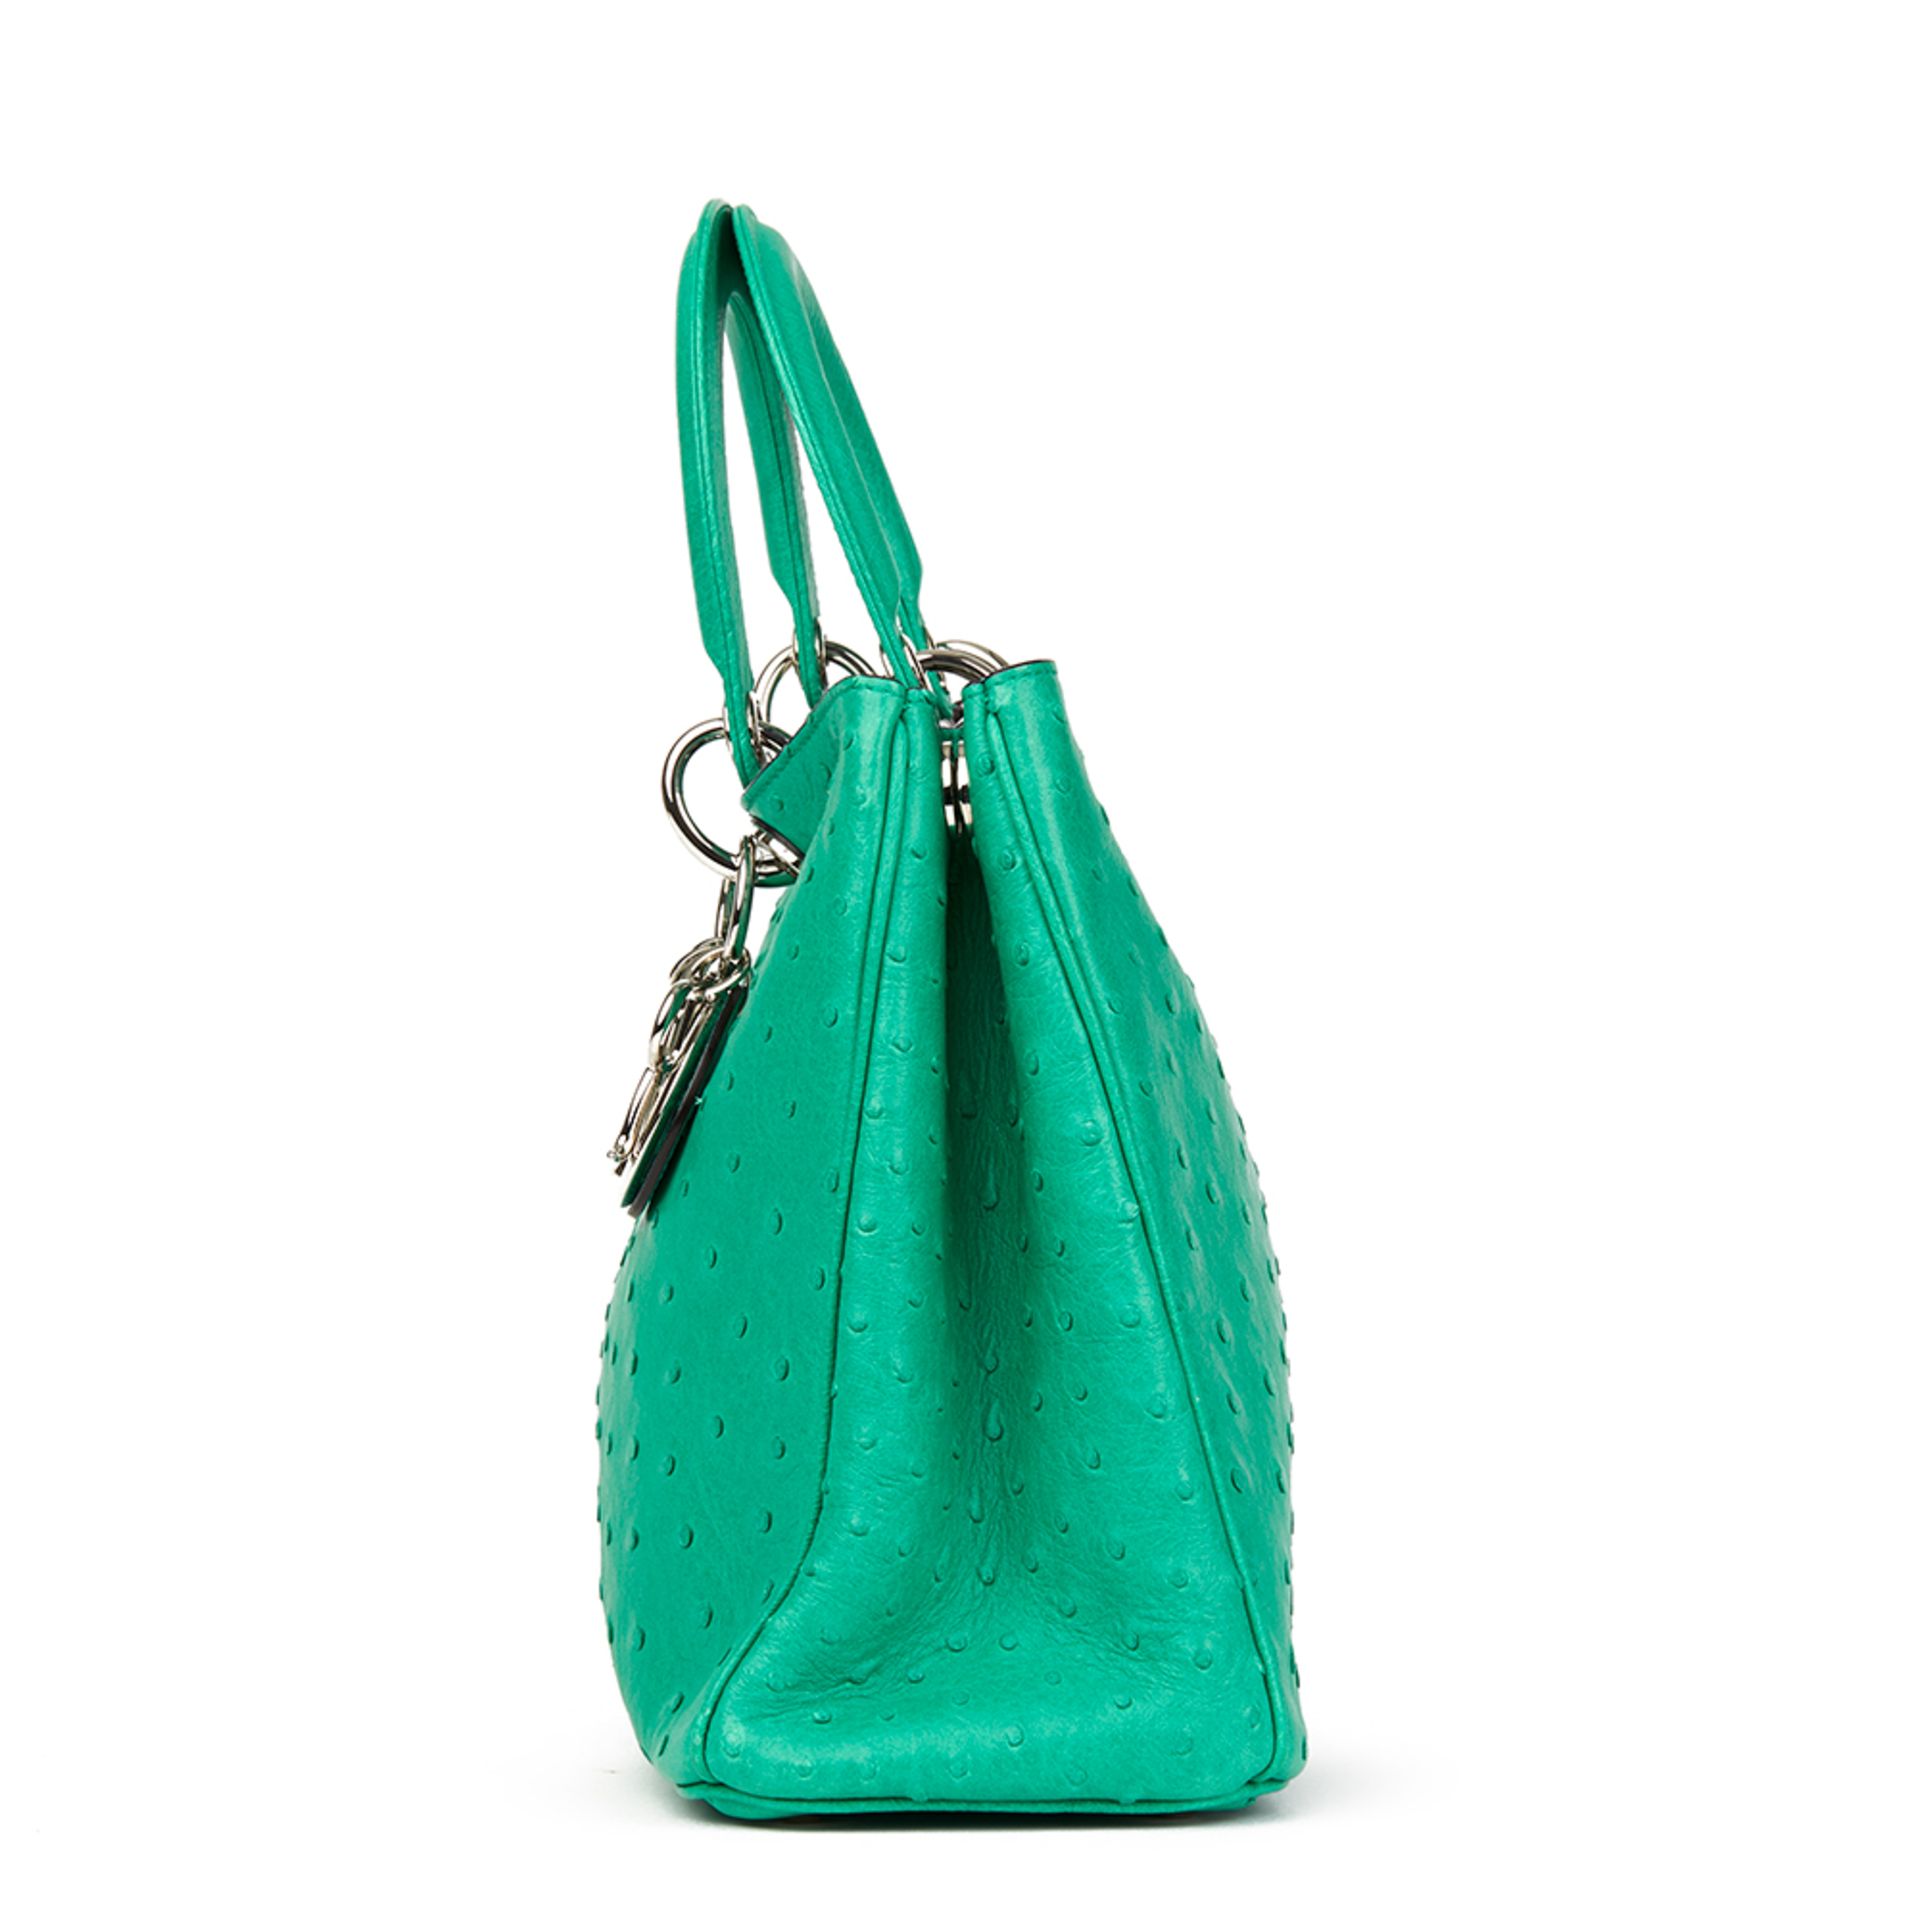 Christian Dior Emerald Ostrich Leather Diorissimo Mm - Image 11 of 11